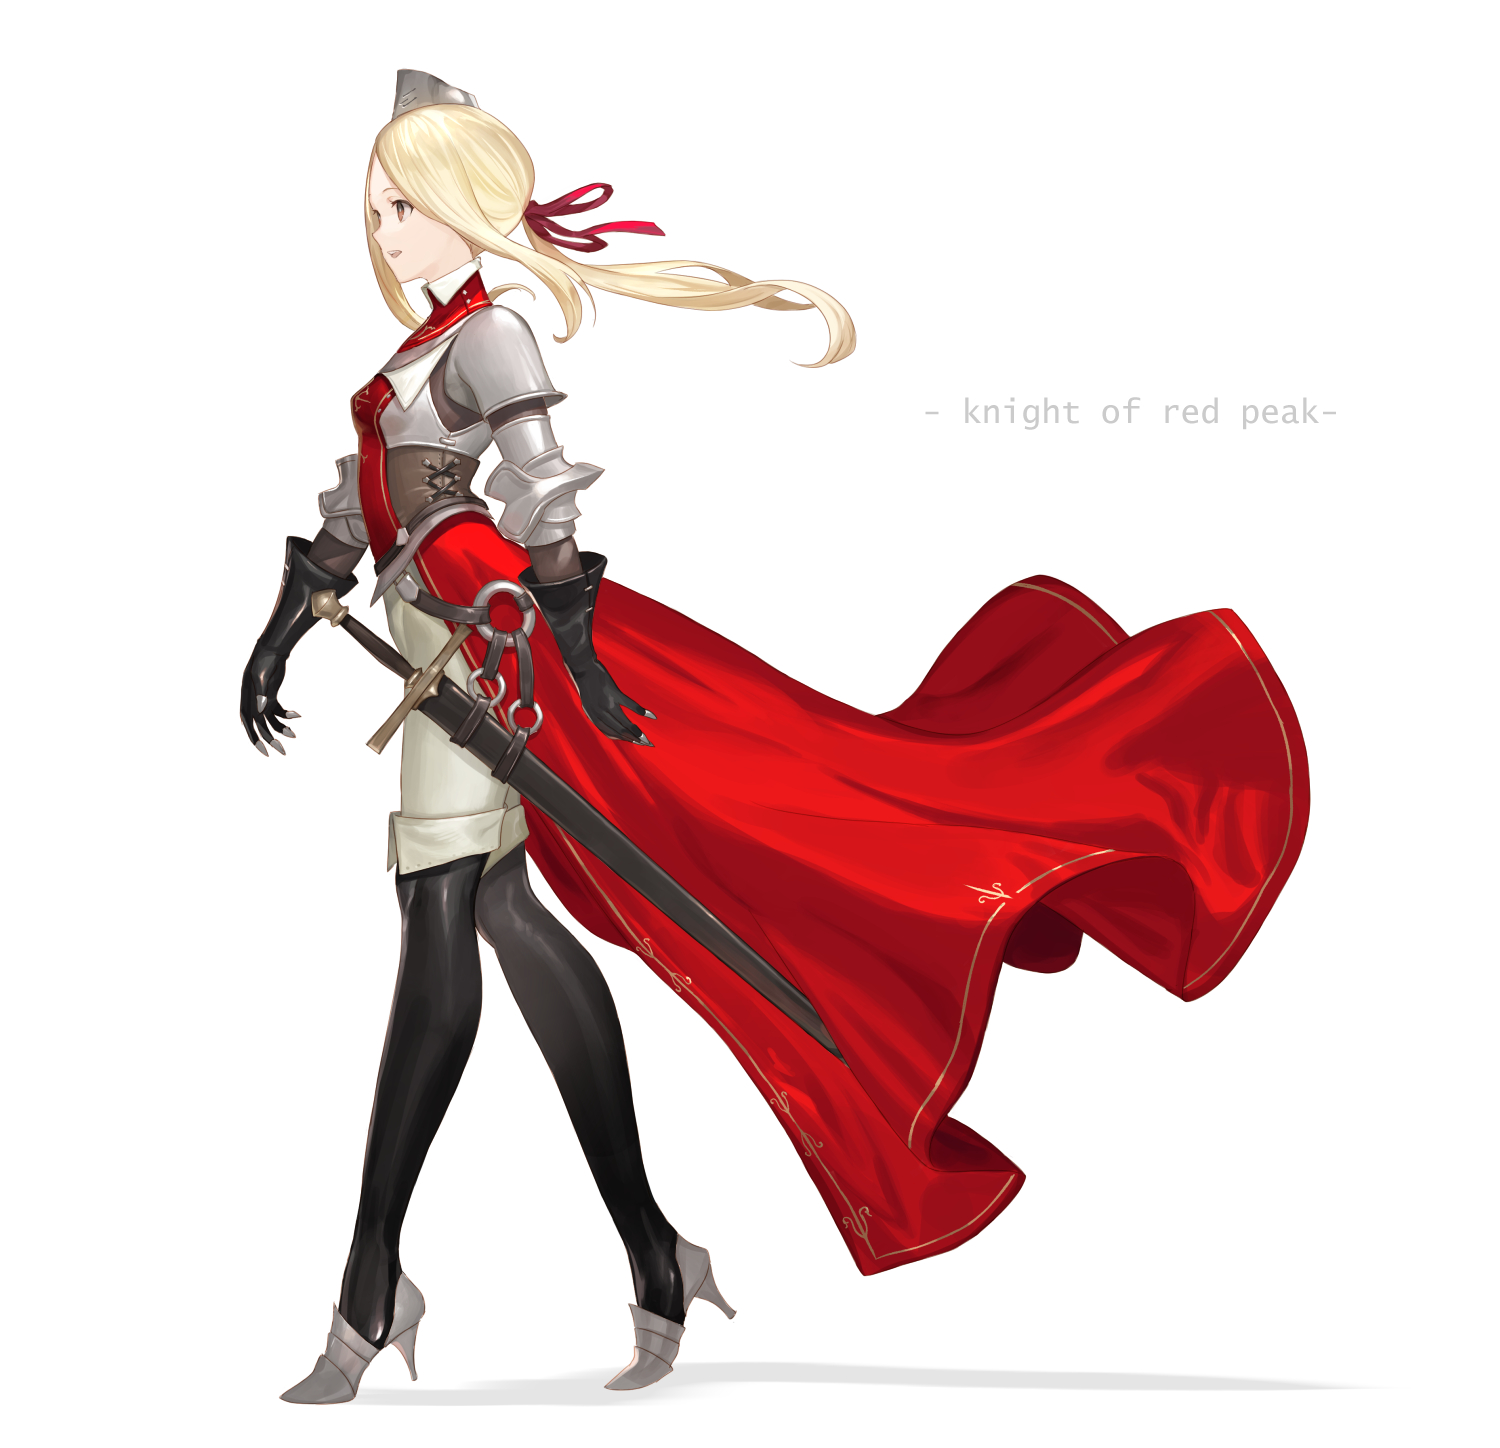 Anime 1500x1448 anime girls portrait display original characters simple background fantasy girl knight anime walking blonde red dress women with swords